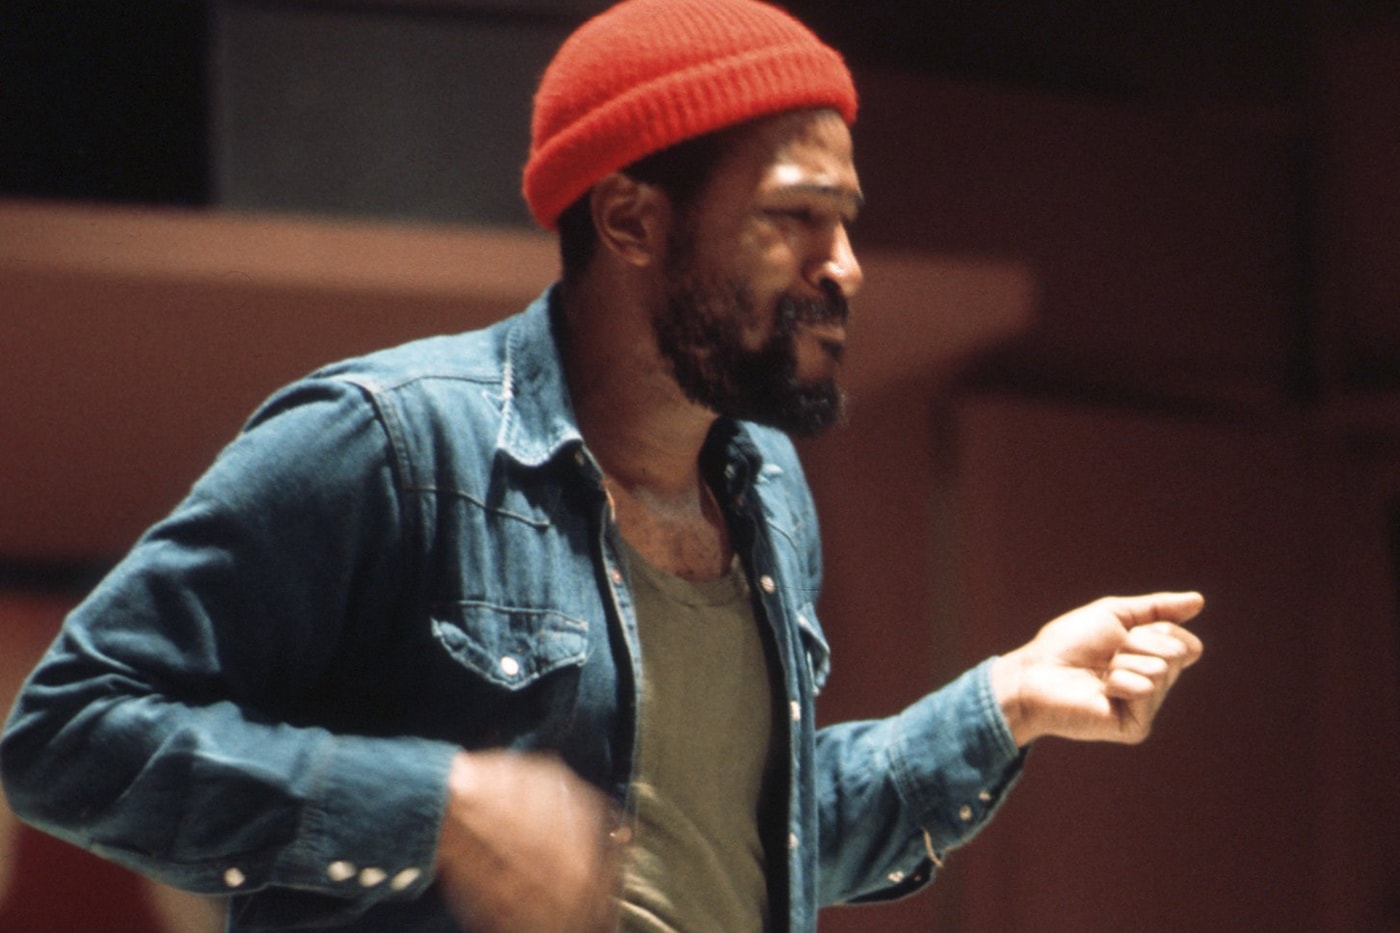 Marvin Gaye Let’s Get It On 50th Anniversary reissue album Stream